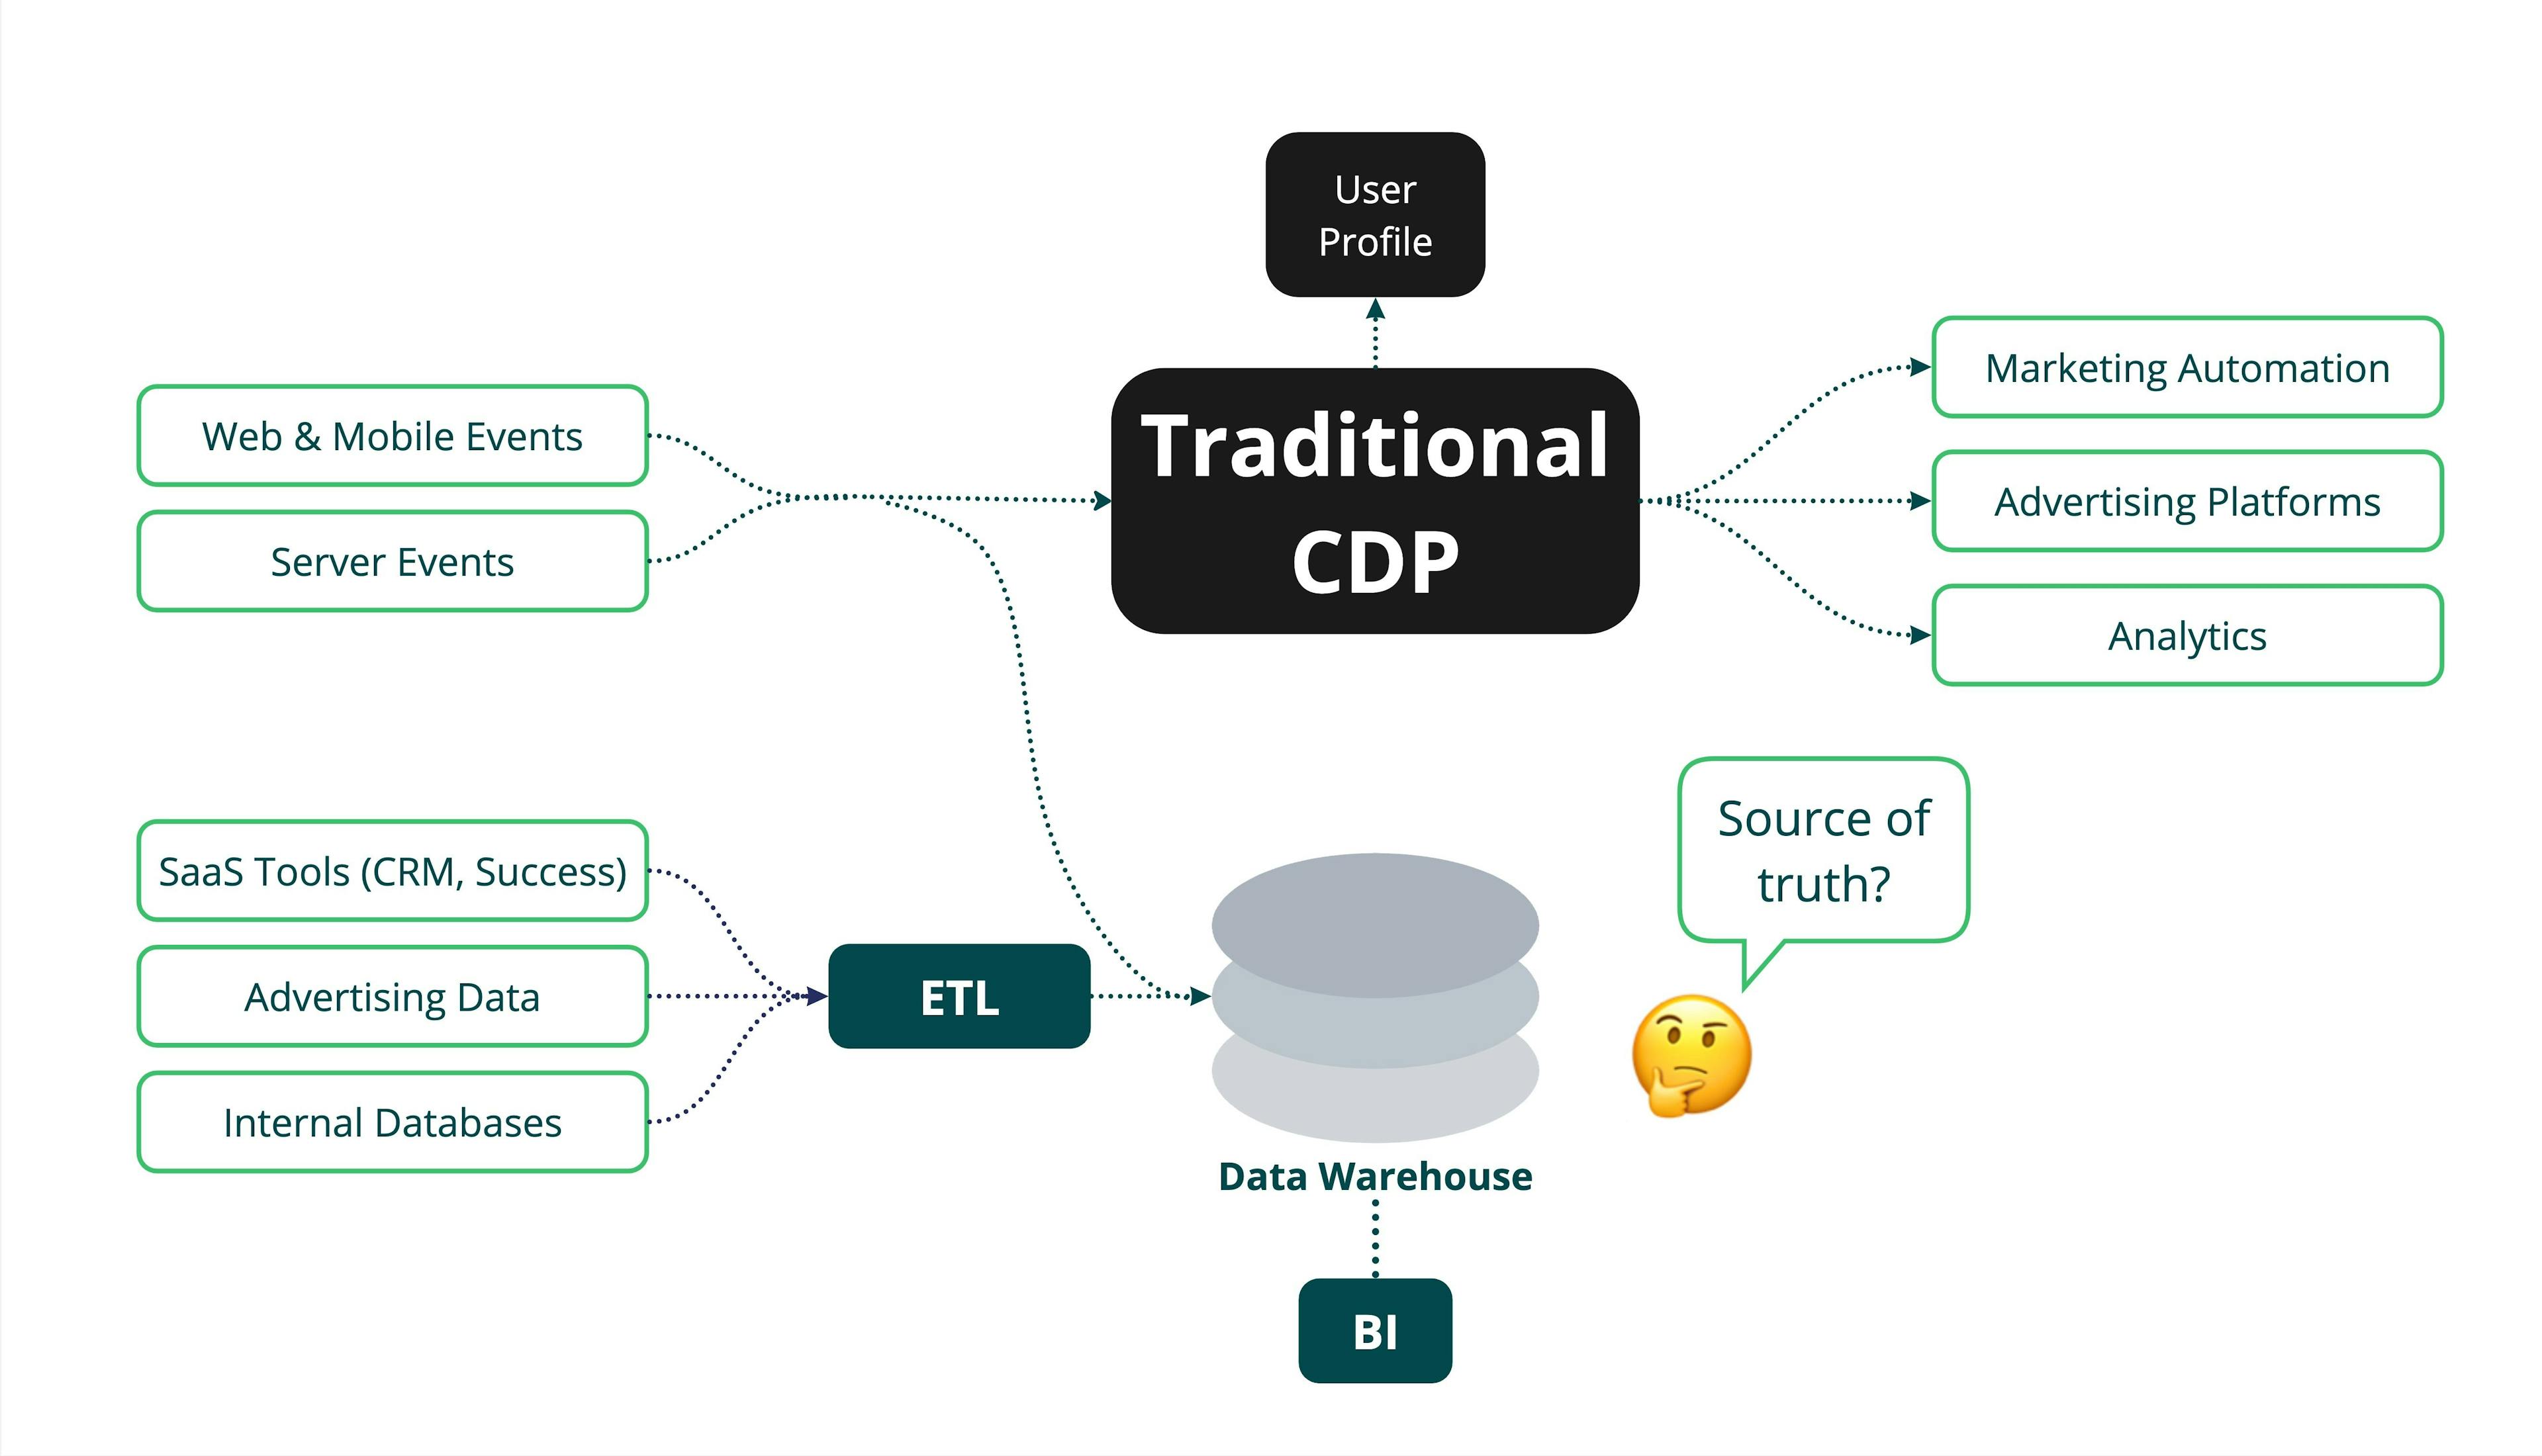 CDPs create a data silo separate from the source of truth in the data warehouse